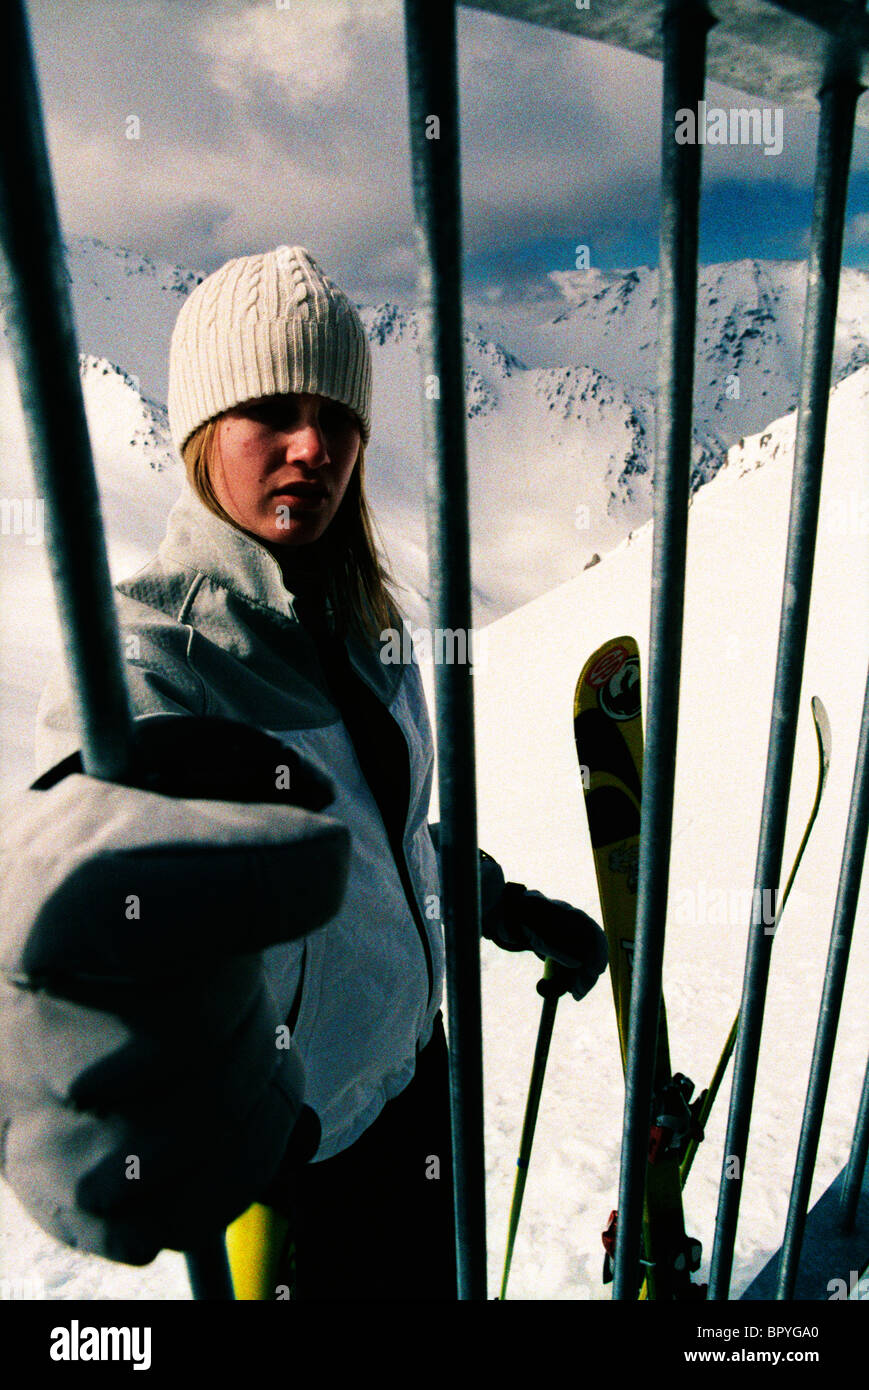 A woman stands behind a fence at a ski resort. Stock Photo